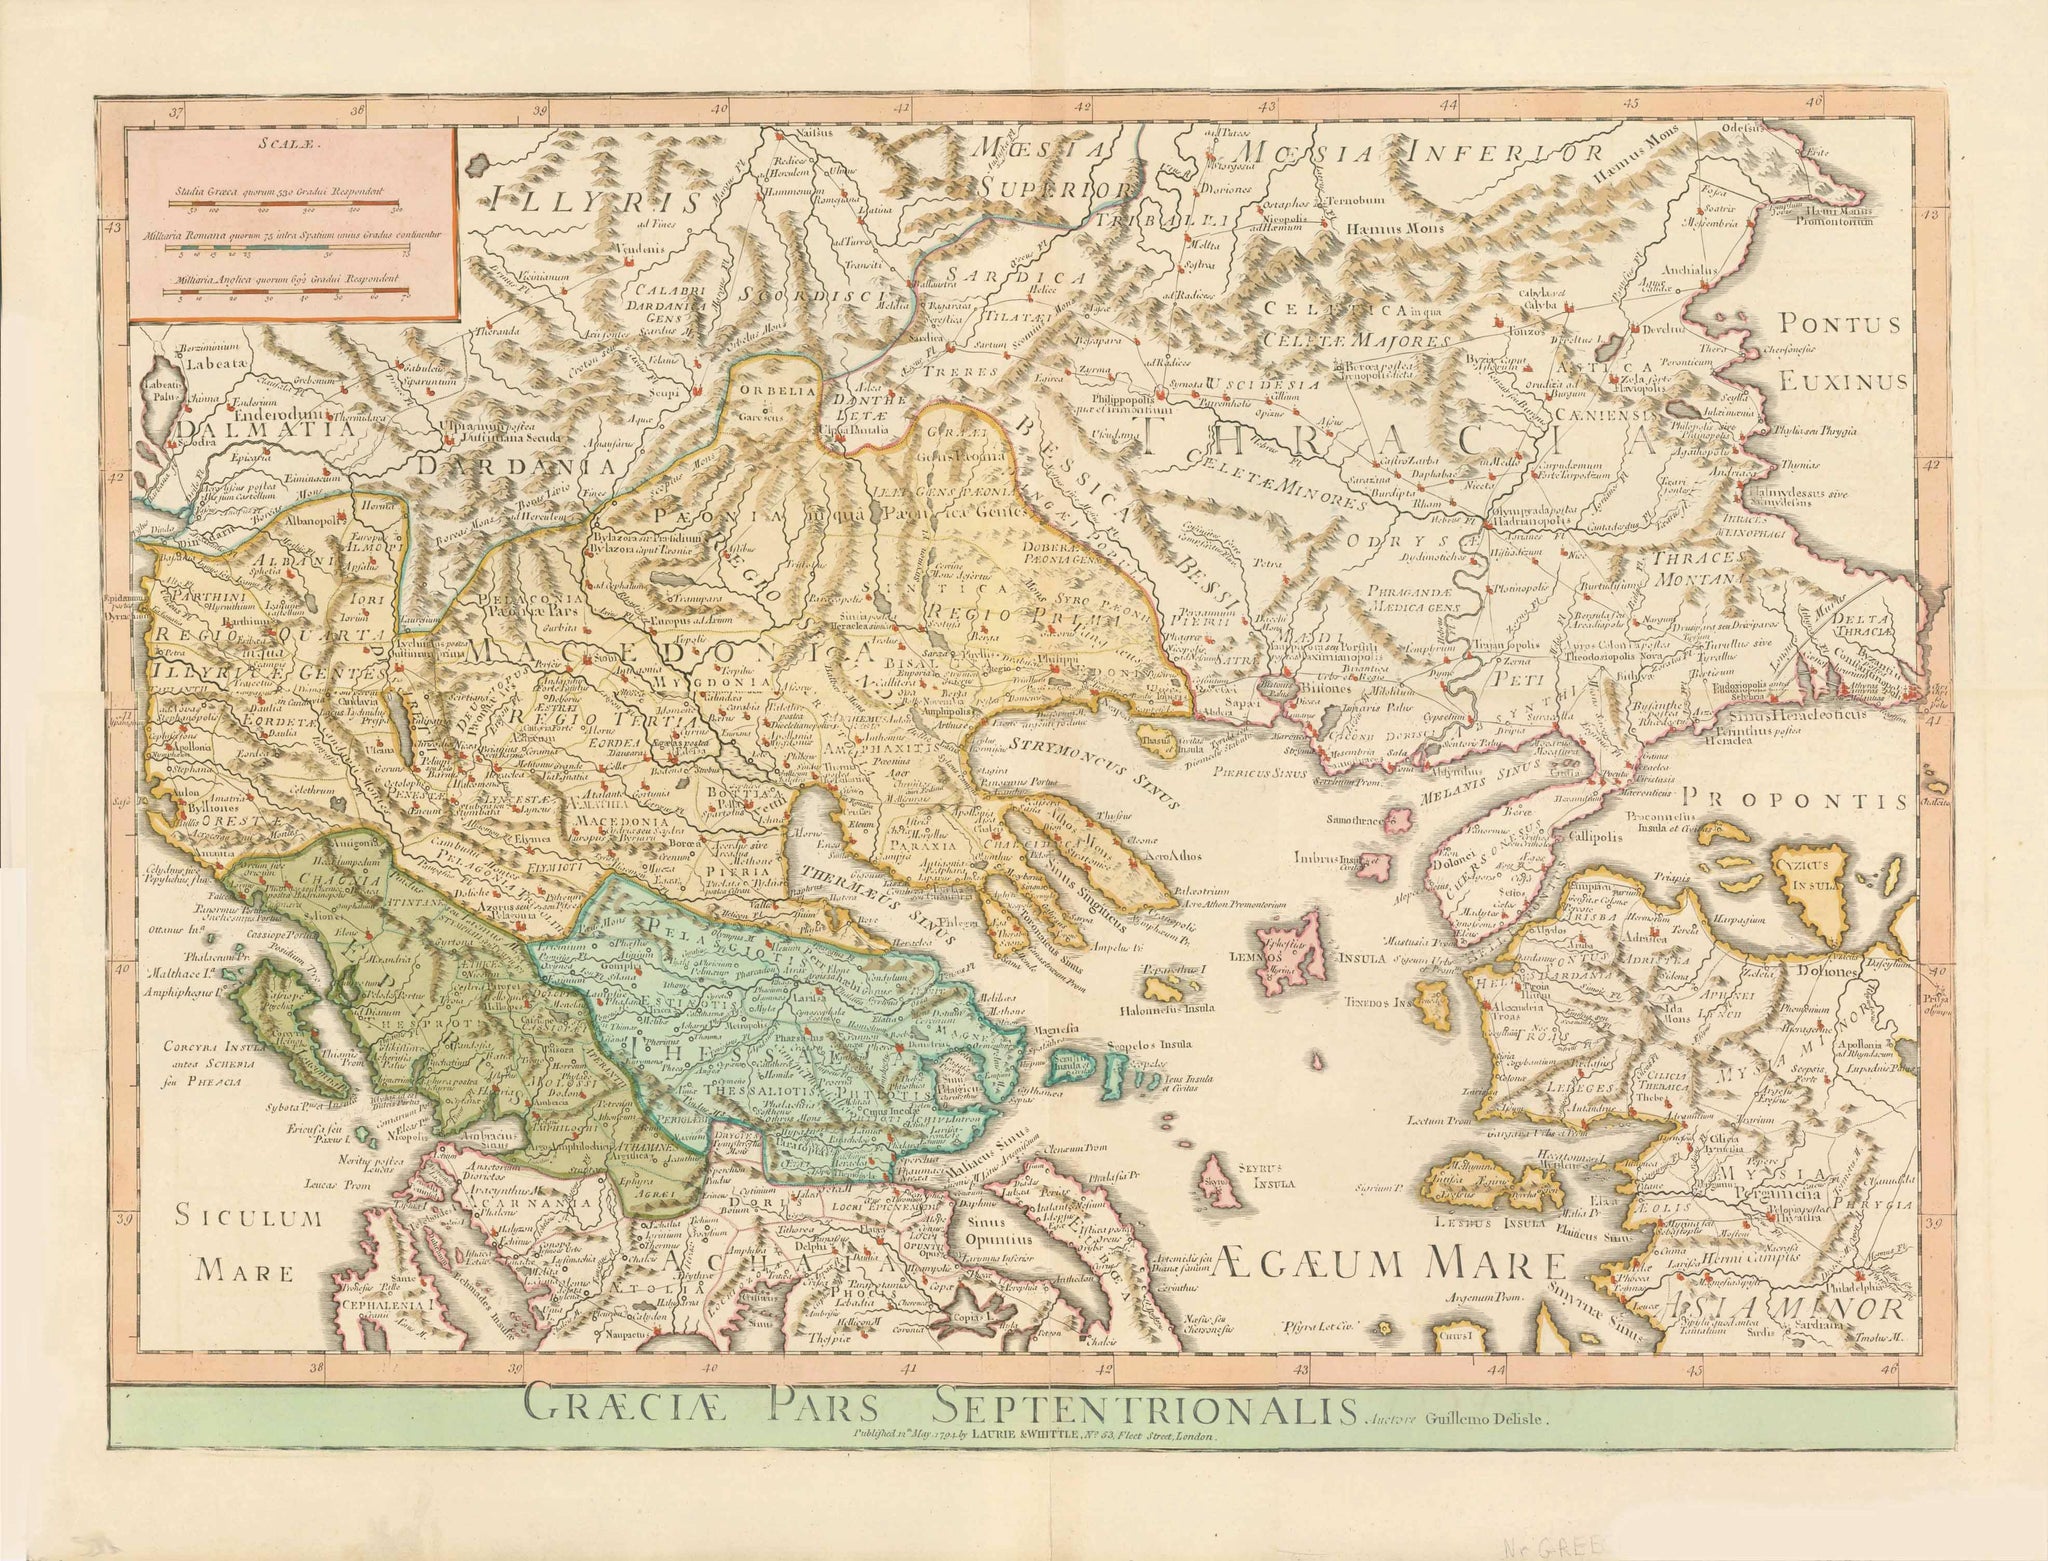 "Graeciae Pars Septentrionalis".  Greece, Griechenland, Grecia,Albania, Macedonia, Northern Turkey, Romania  Copper etching by Guillemo Delisle. Very attractive modern hand coloring over original borderline coloring. Puiblished by Laurie & Whittle. London, 1794.  This very attractive map centers in detail on Northern Greece, Albania, Macedonia, Northern Turkey, Romania, Bulgaria, reaching over to ãConstantinople" and the Black Sea. 